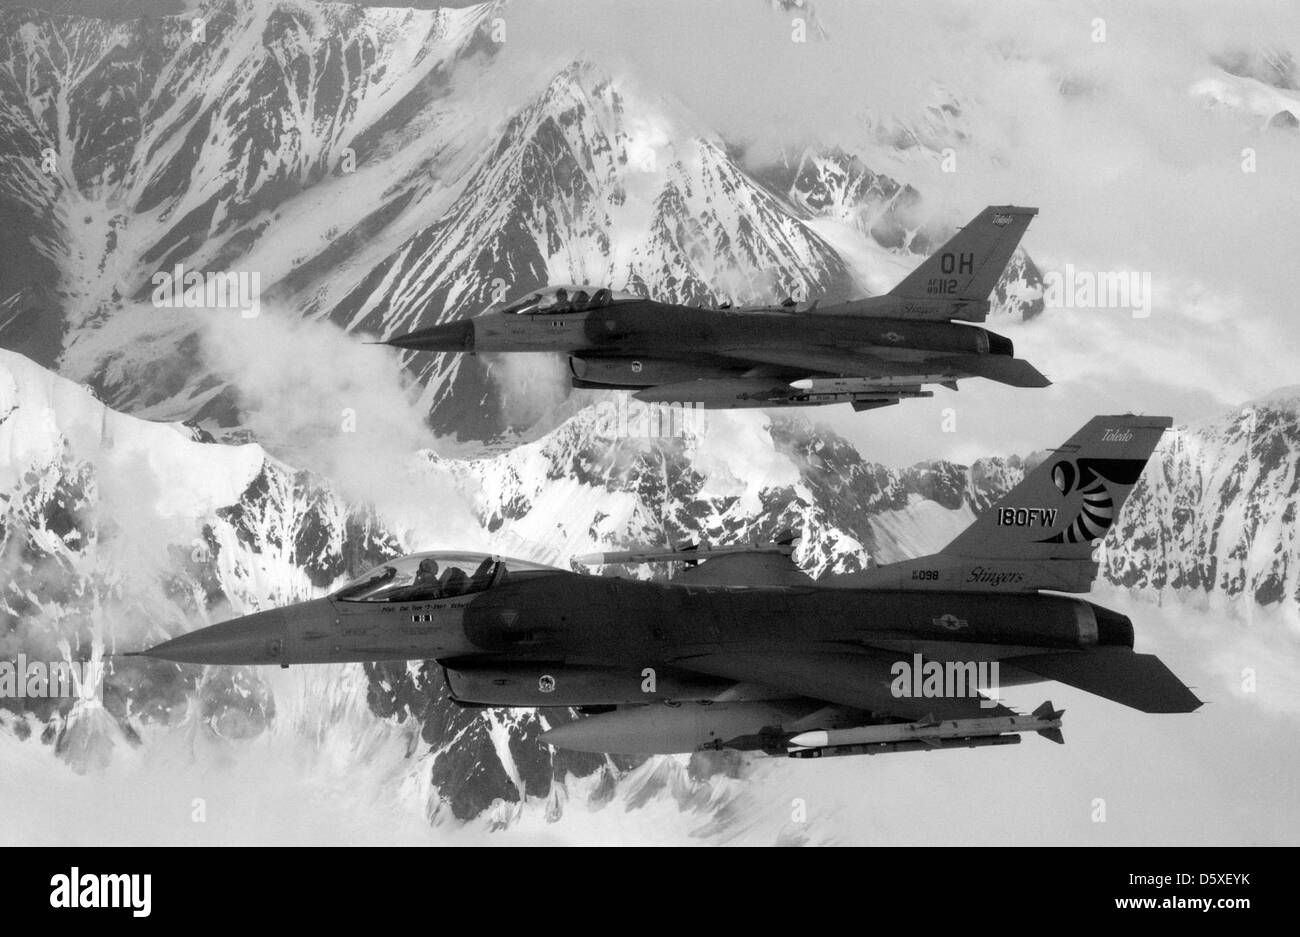 Two Ohio Air National Guard 112th Fighter Squadron (the Stingers), 180th Fighter Wing, F-16 C/D Fighting Falcon fighter aircraft perform a red air manuever in the skies over Alaska on June 14, 2006, during Exercise Northern Edge 06, which is a U.S. Pacific Command joint training exercise, hosted by the Alaskan Command, to prepare U.S. forces to respond to a crisis in the Asian and pacific region. (U.S. Air Force photo by Master Sgt. Rob Wieland) (Released) Stock Photo